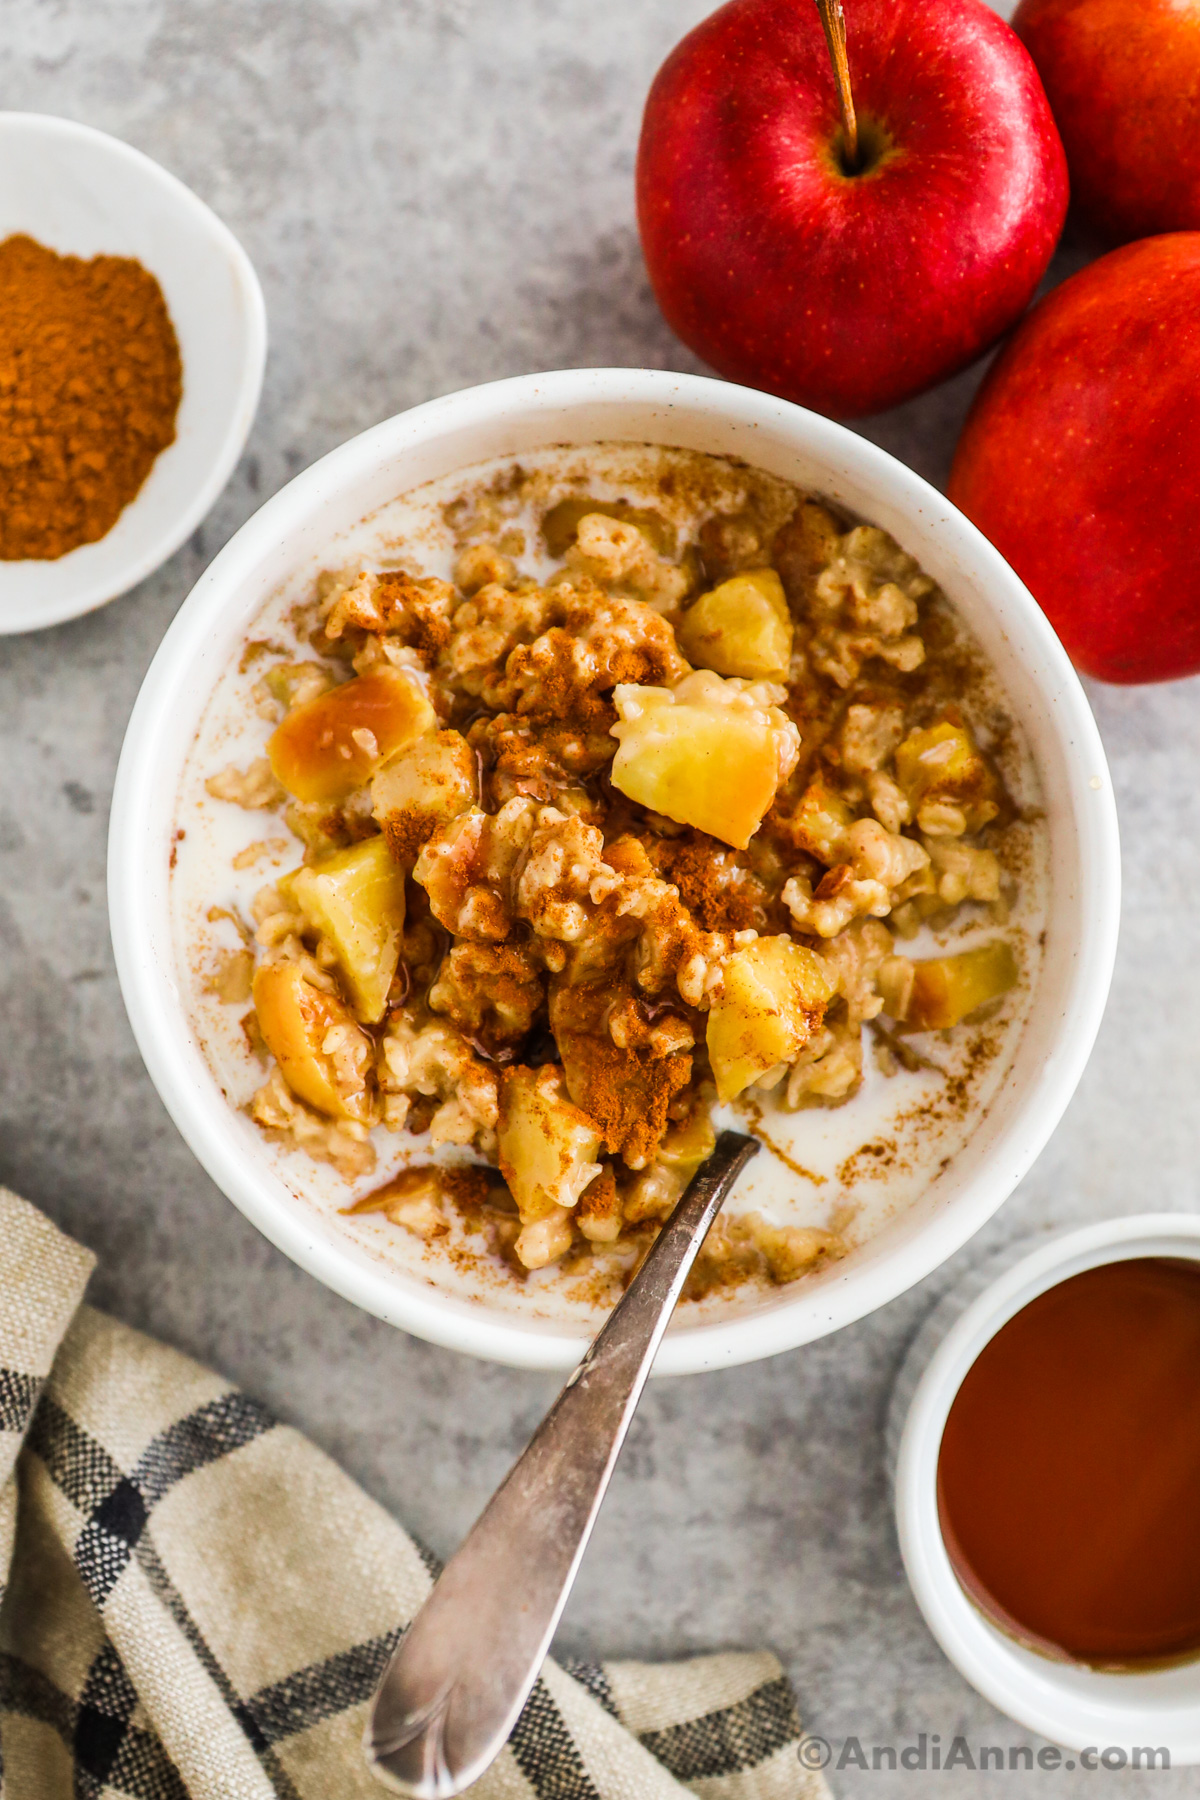 A bowl of apple cinnamon oatmeal with a spoon, surrounded by fresh red apples and spices.